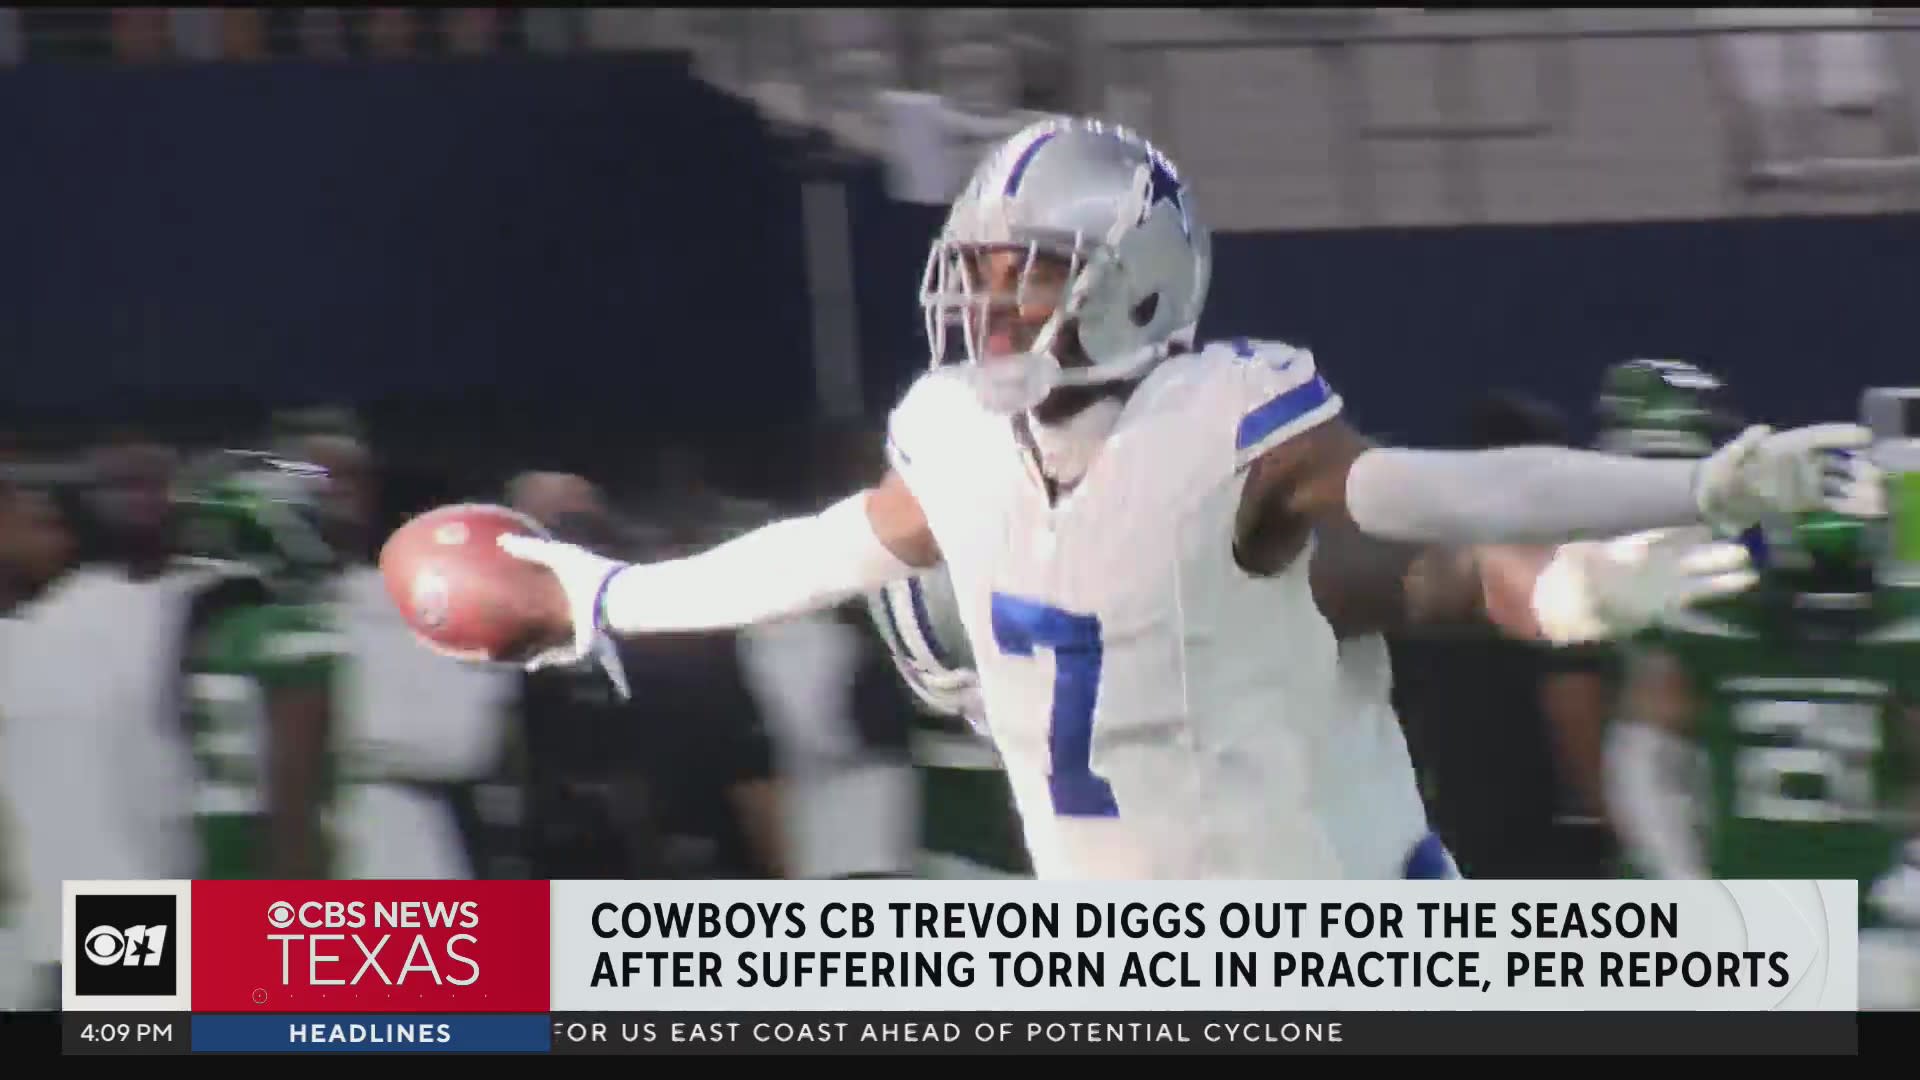 Dallas Cowboys: What injury did Trevon Diggs sustain and how long